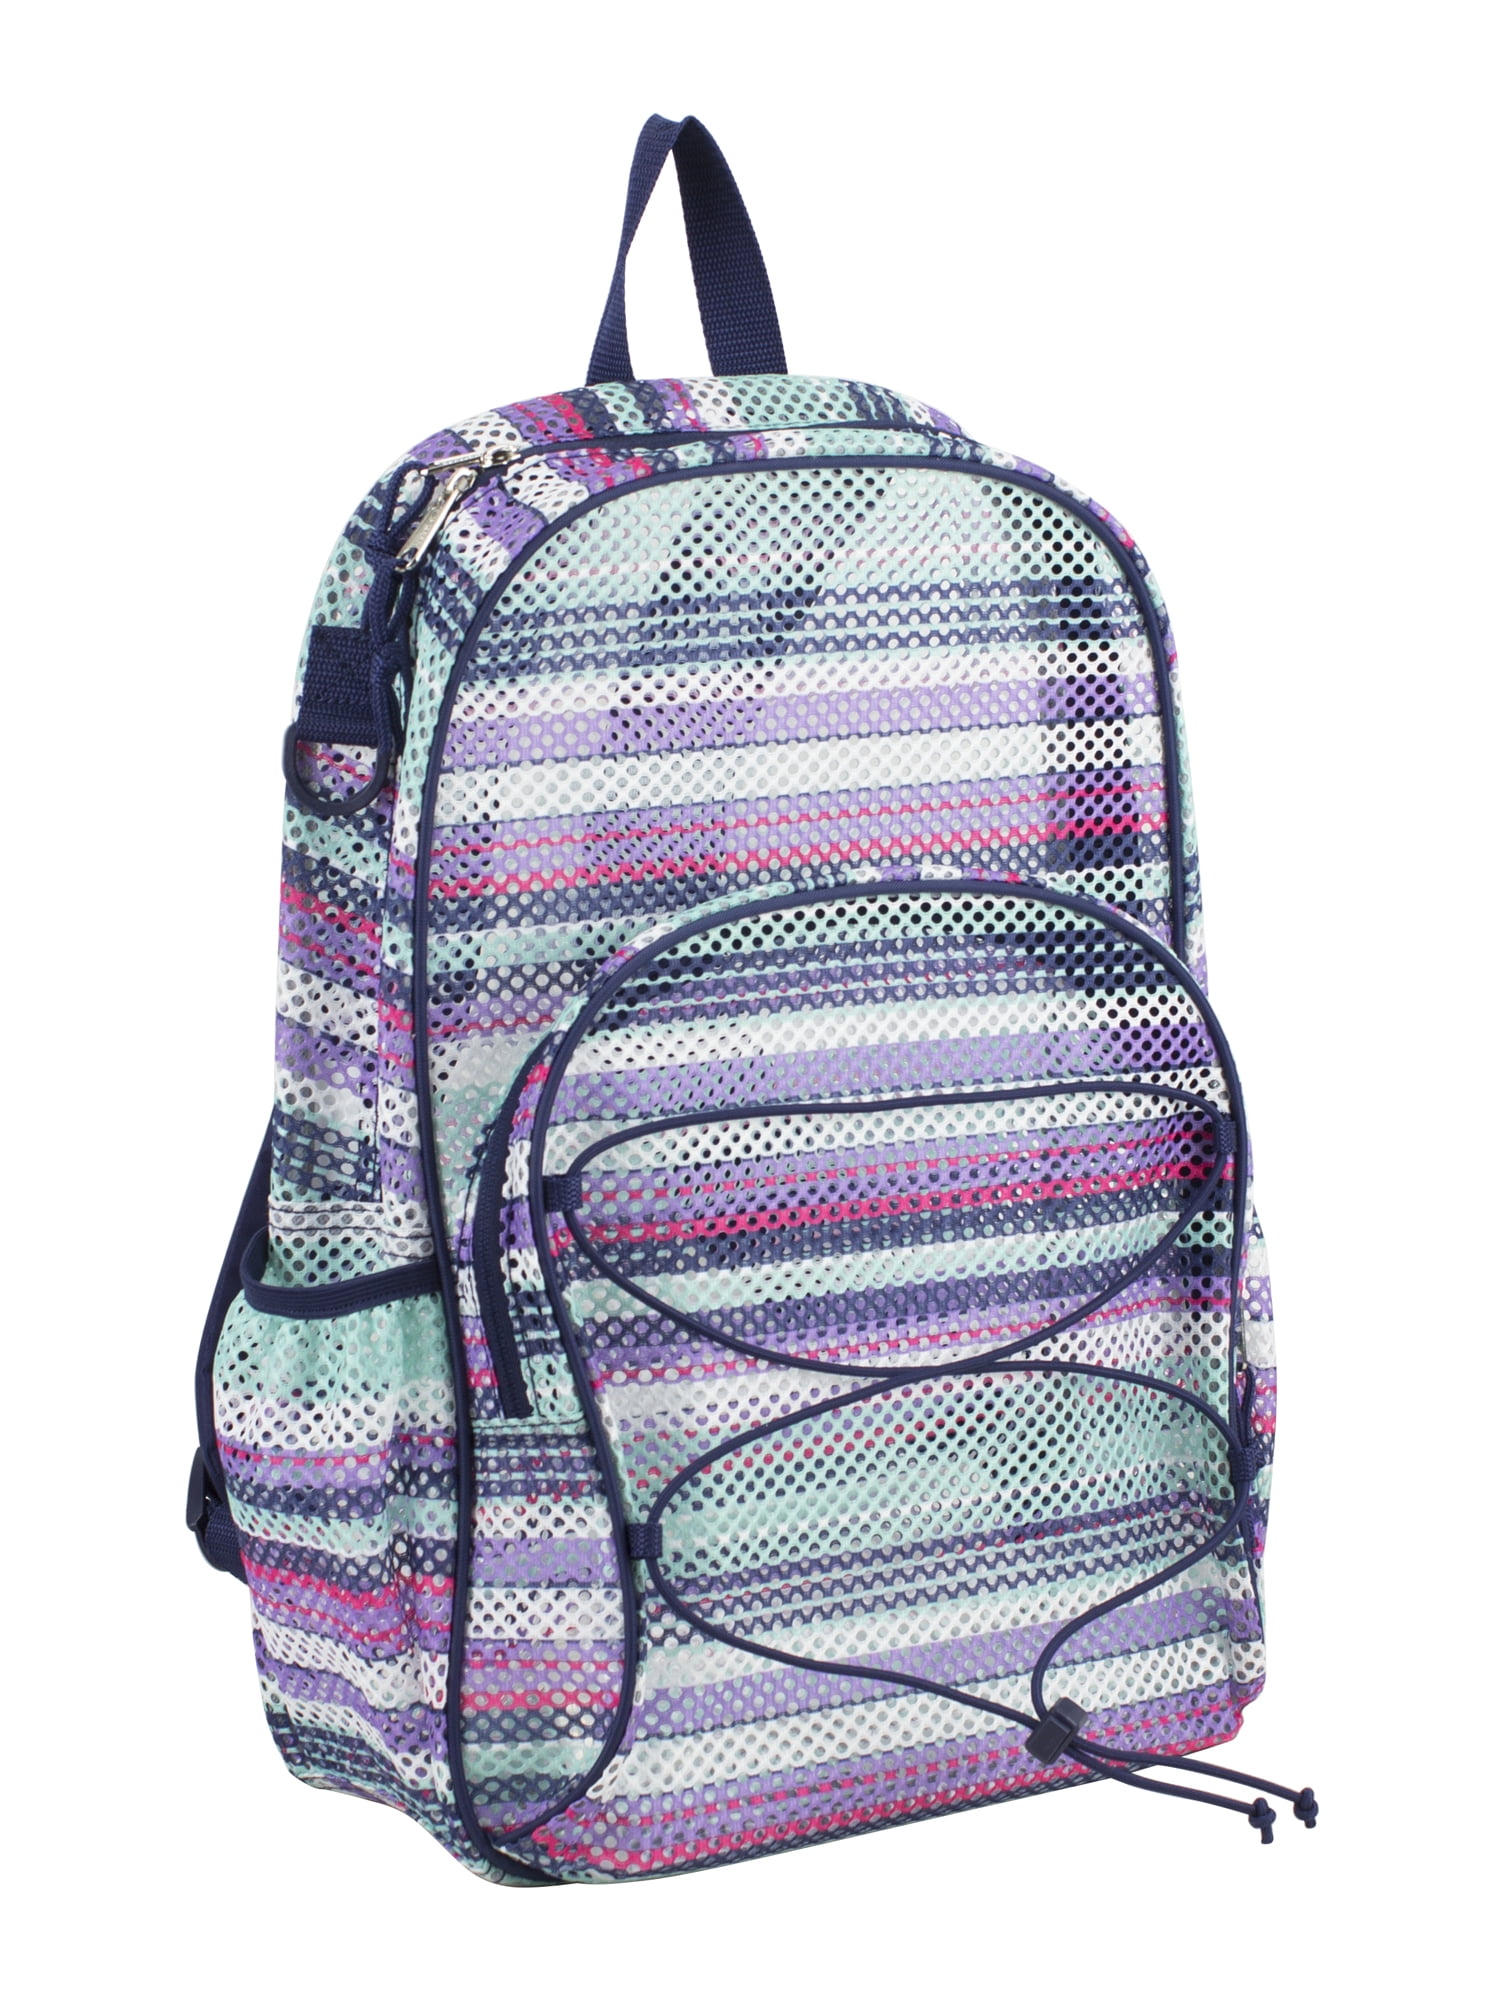 Blue/Candy Stripe Eastsport Mesh Bungee Backpack With Padded Shoulder Straps 